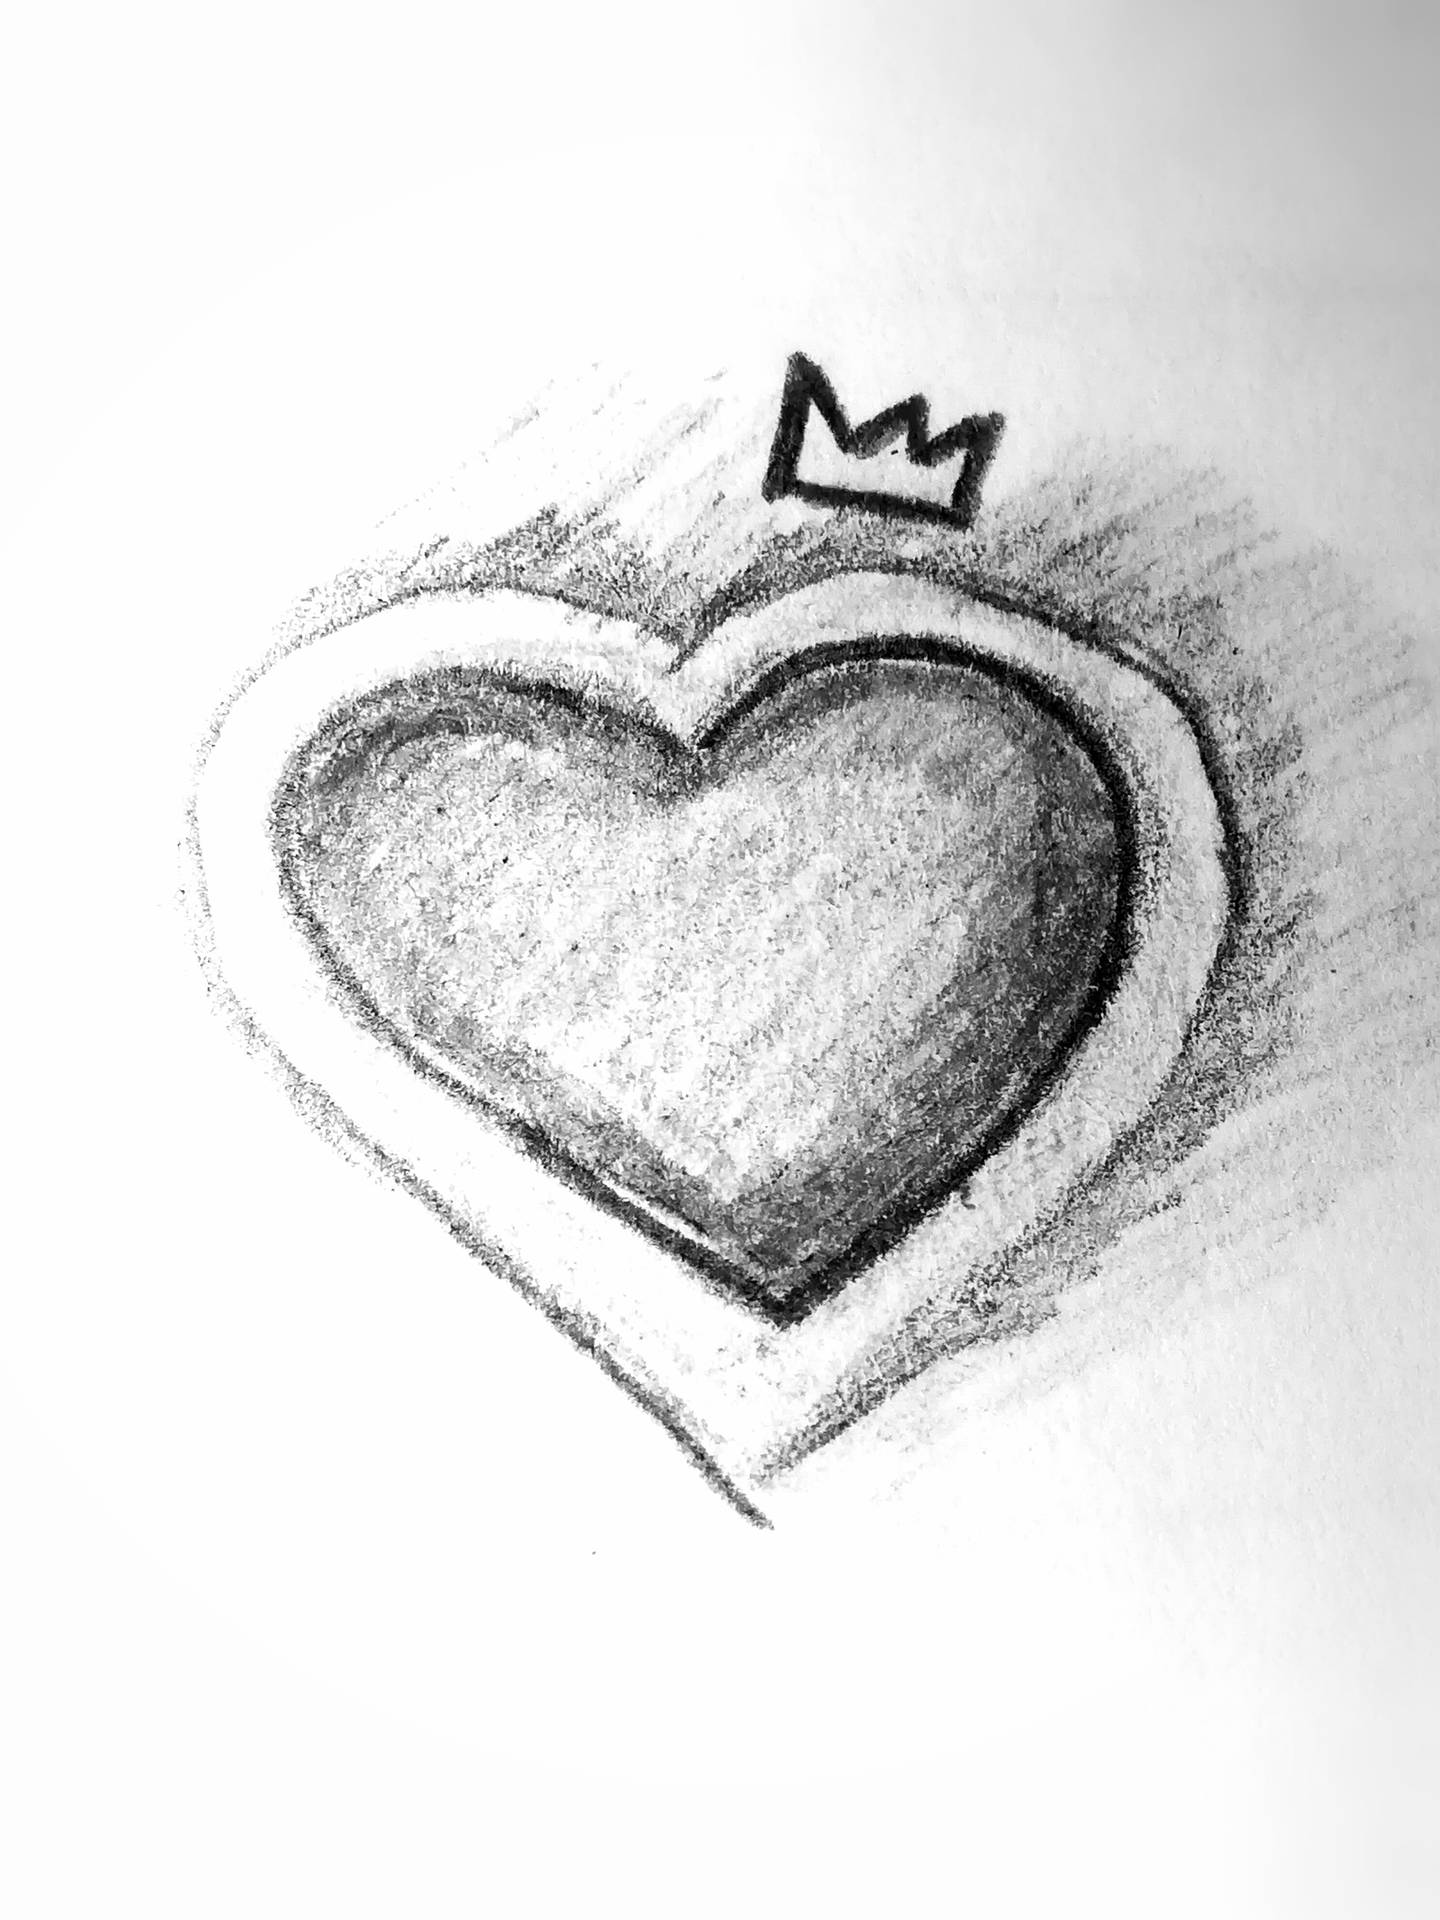 Black And White Heart Sketch Wallpaper